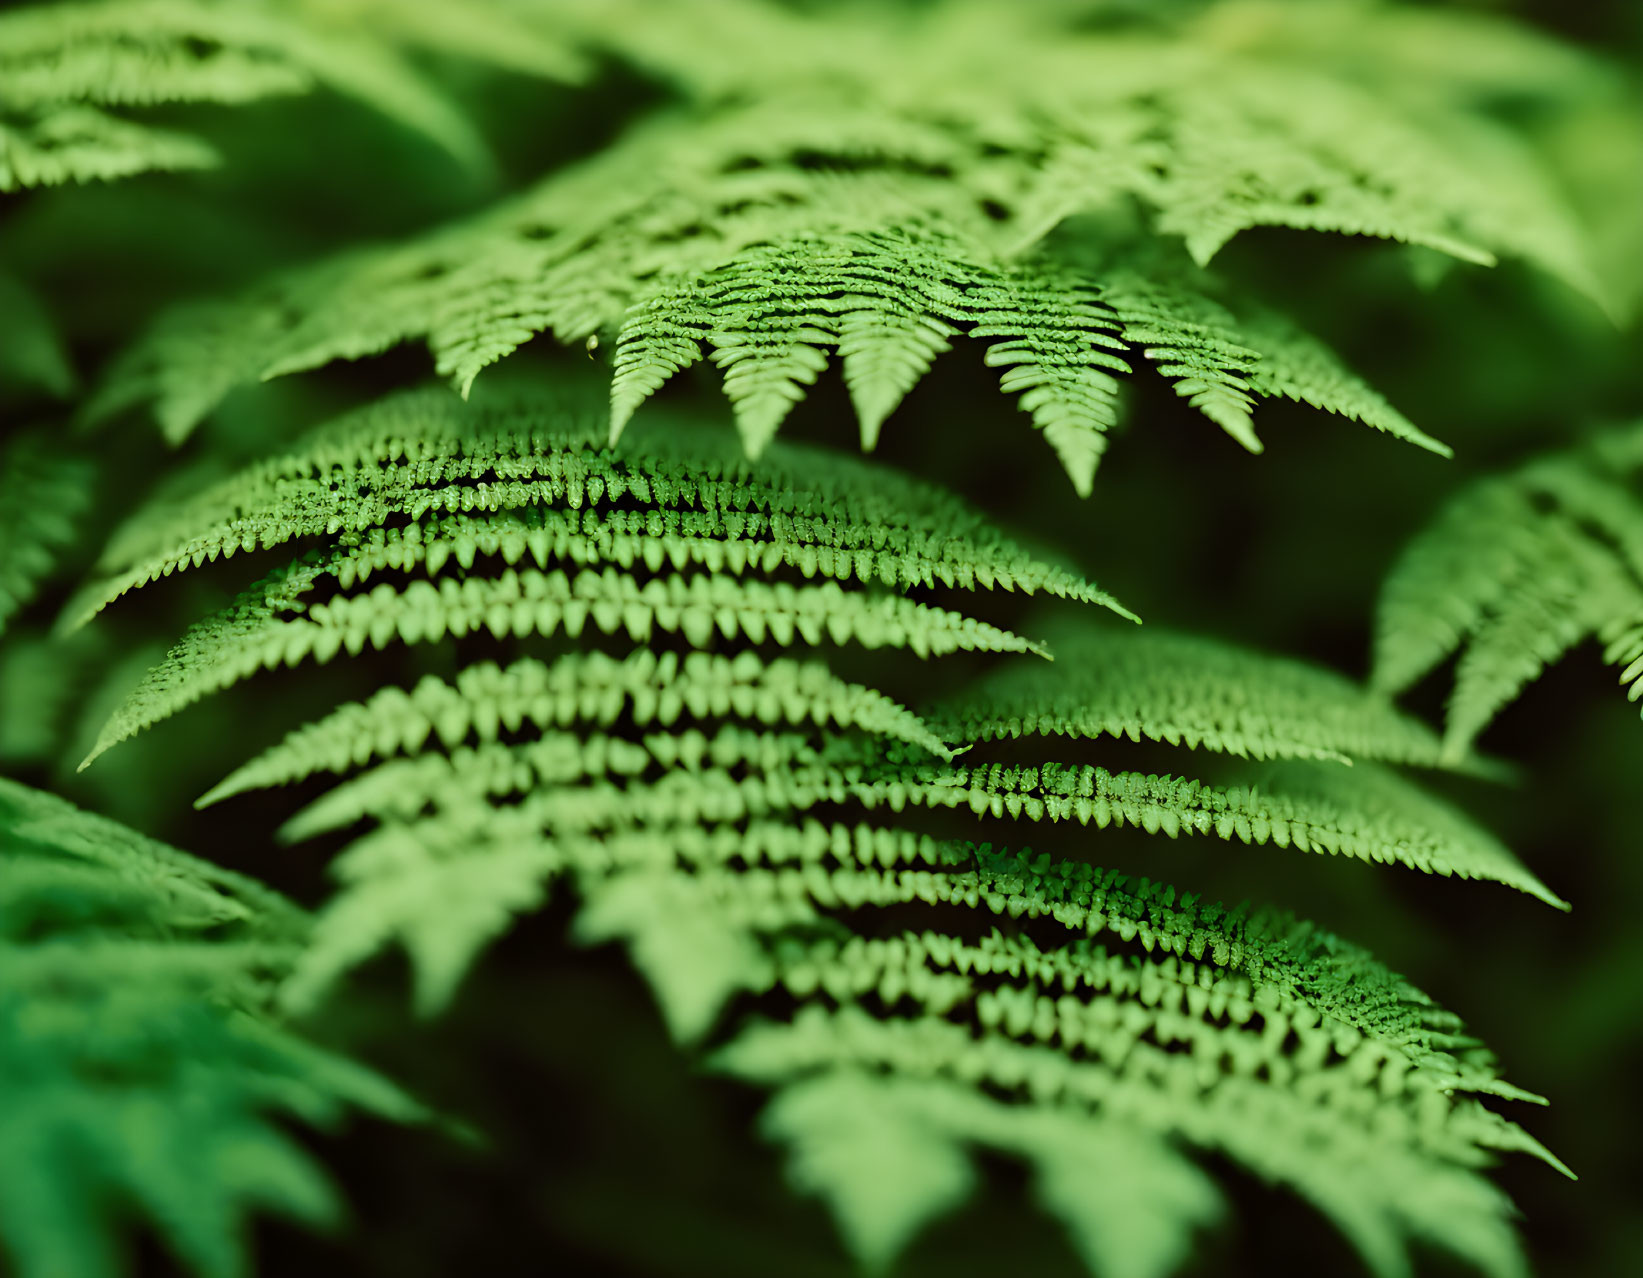 Intricate leaf patterns of lush green ferns in soft focus background